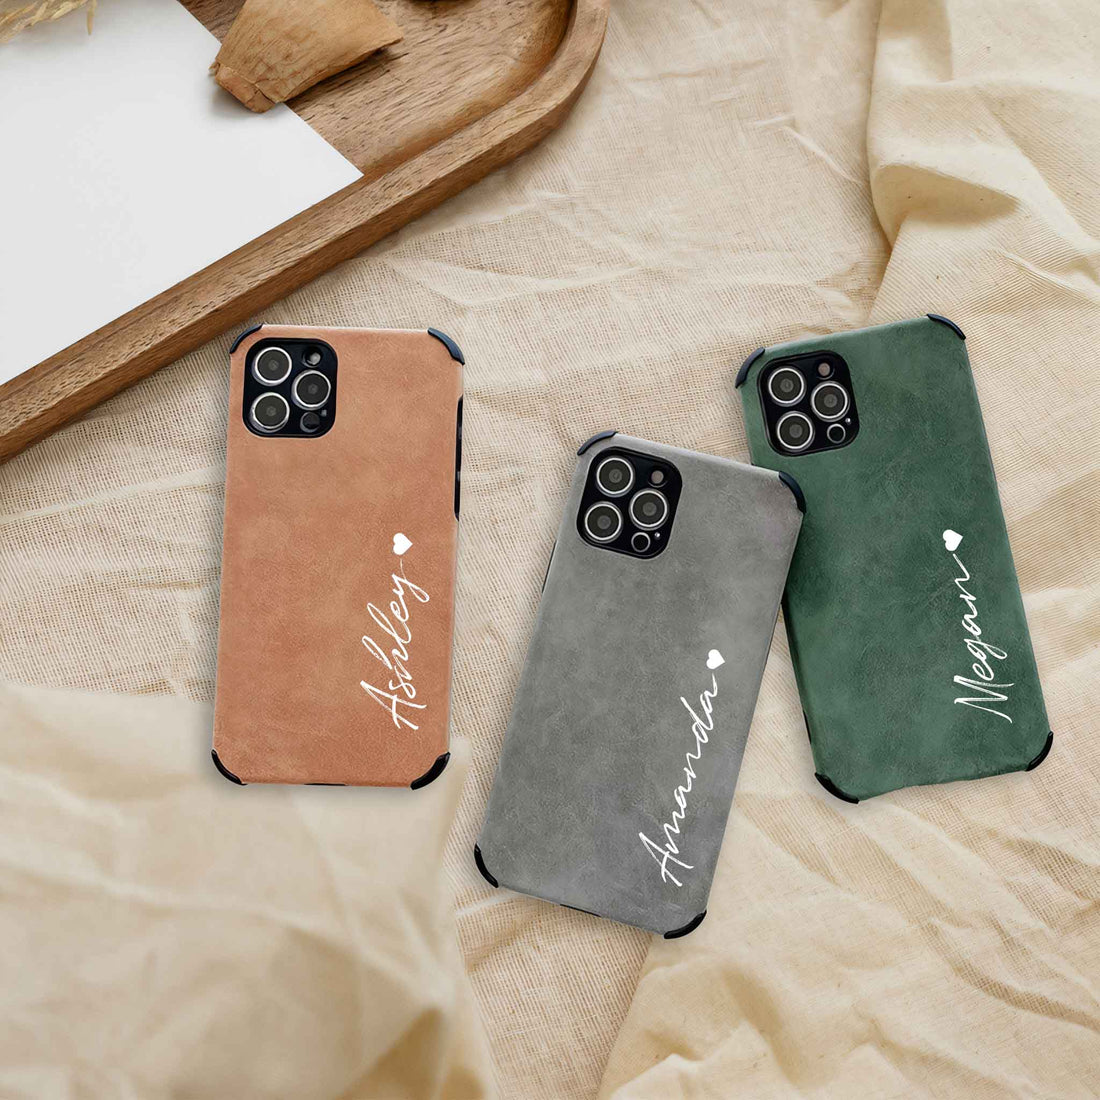 Suede Leather iPhone Case - #Snap Bands#